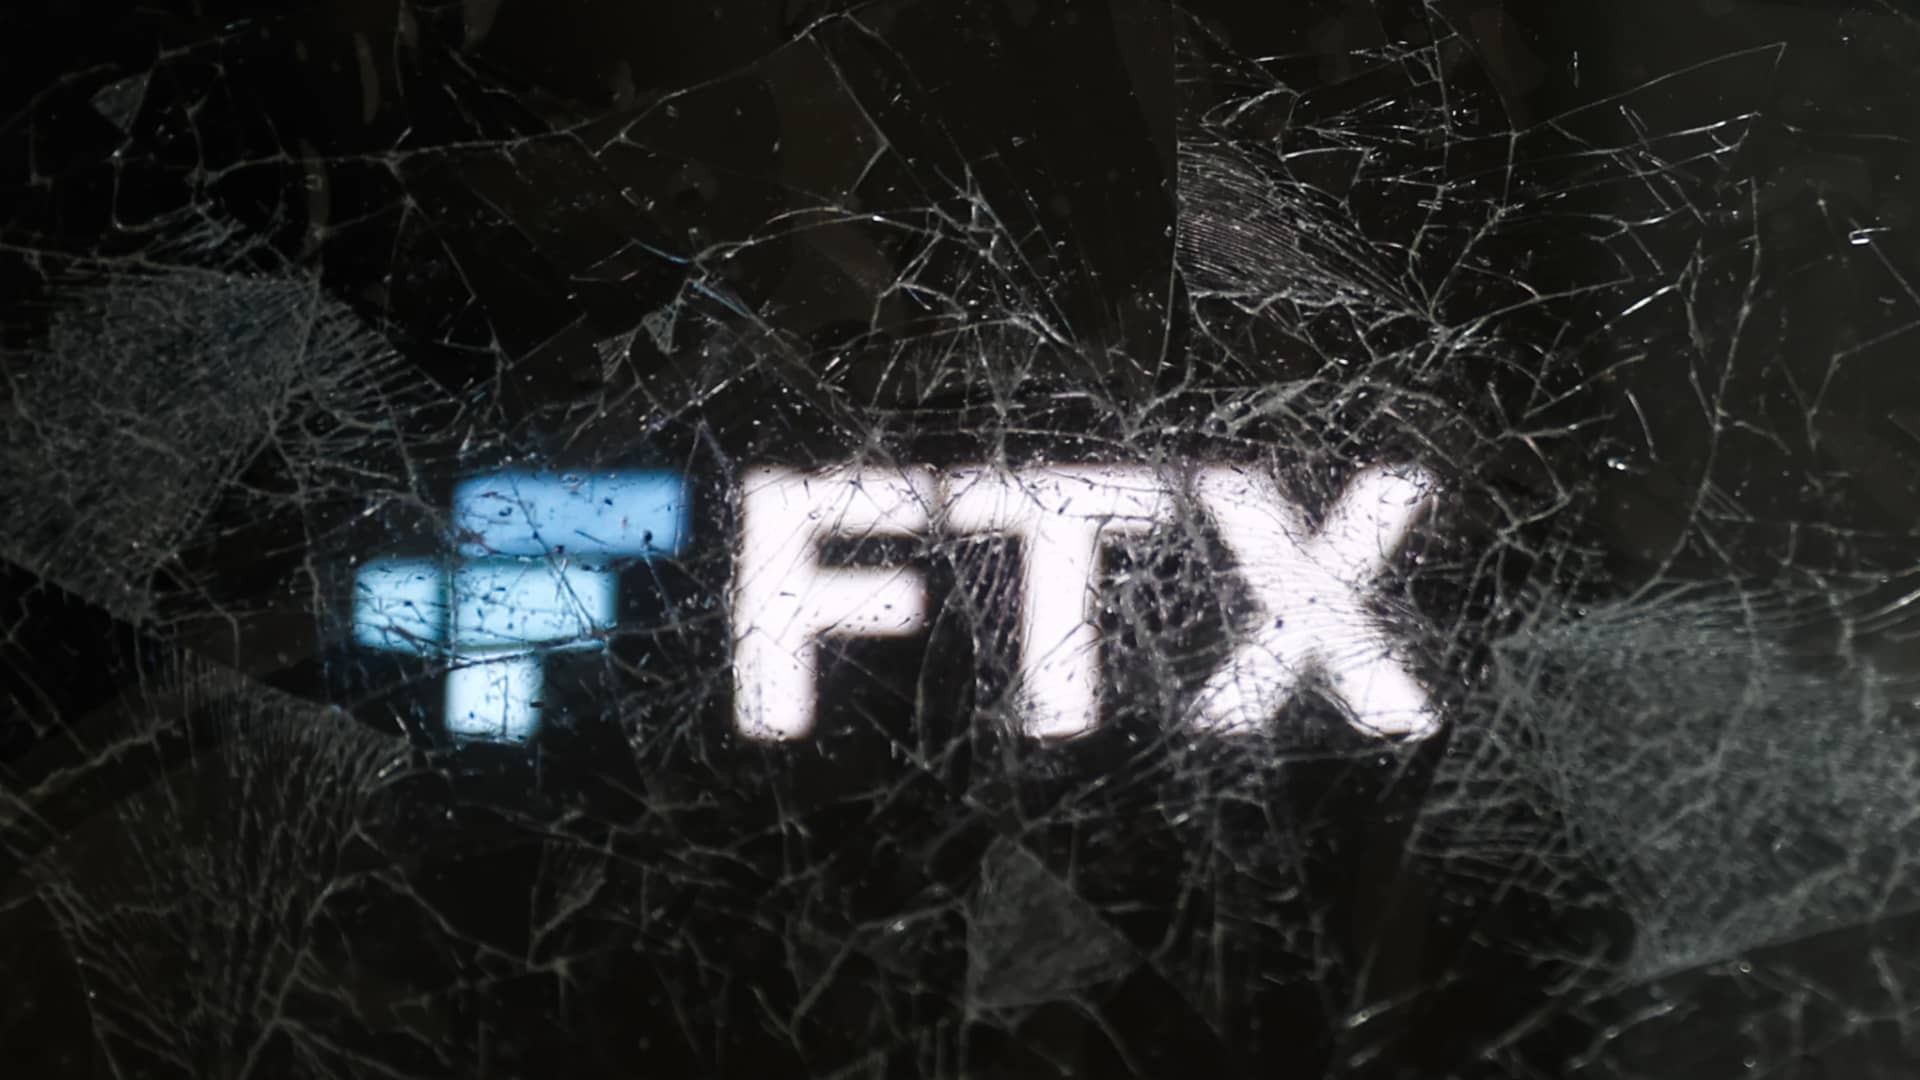 FTX says 5 million of crypto was hacked